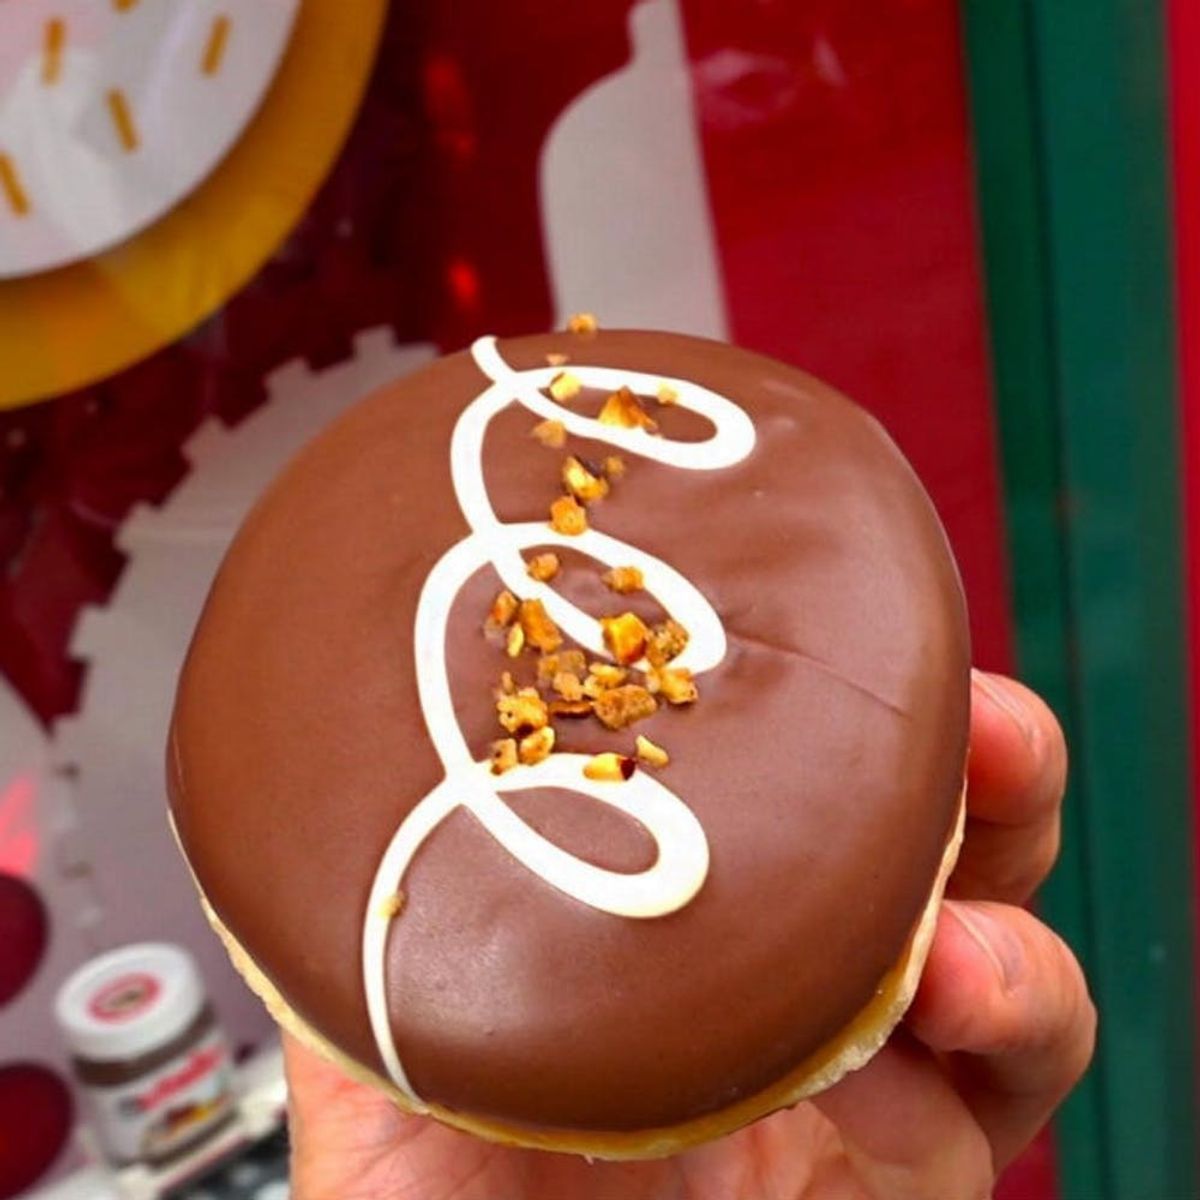 Nutella Lovers Can Now Get Their Fix at Krispy Kreme